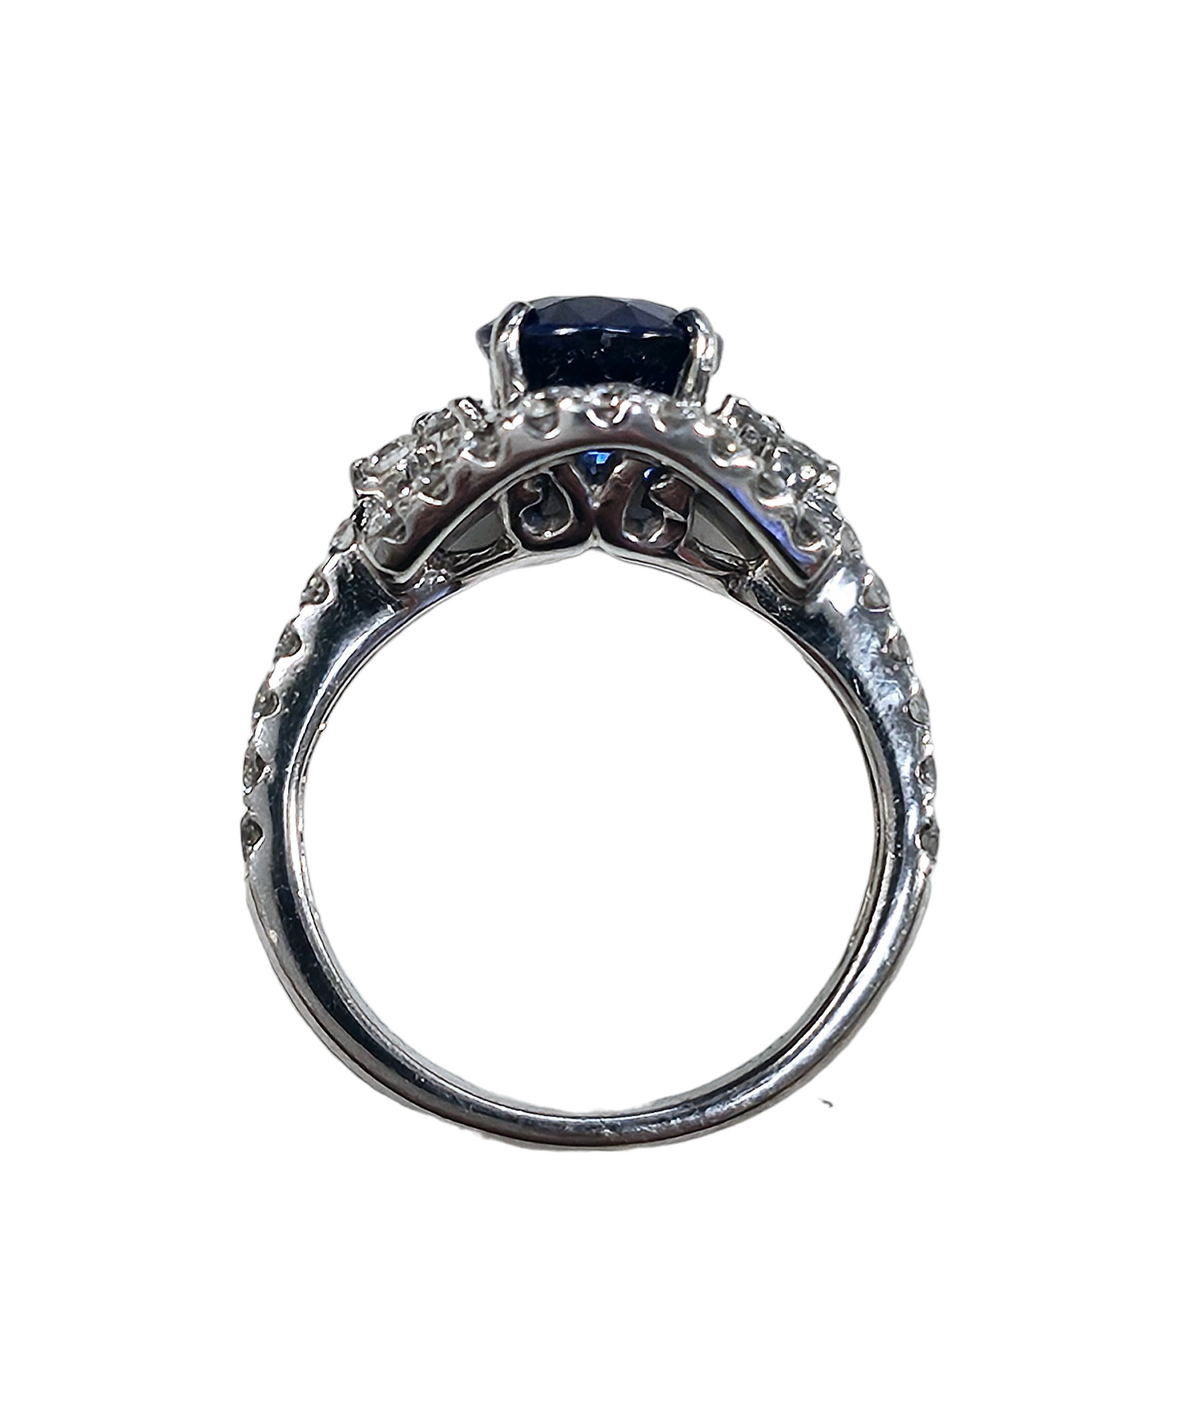 Royal Blue Sapphire and Diamond Ring made in 18-Karat White Gold